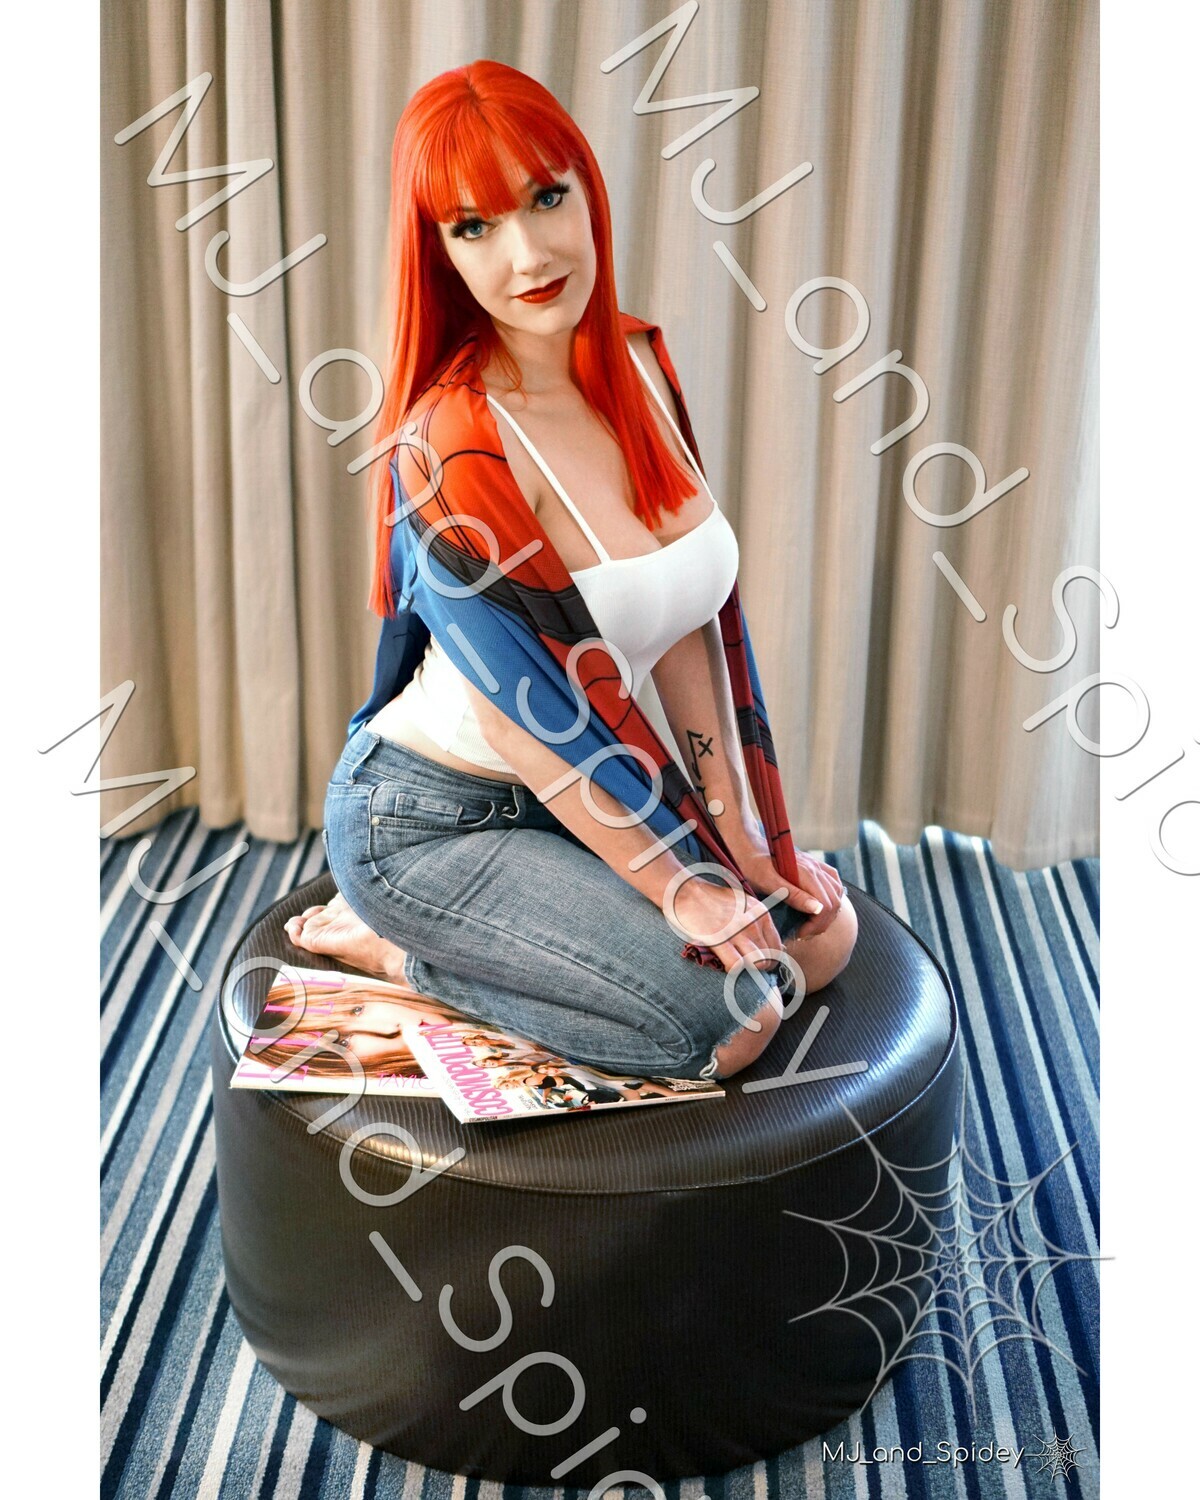 Marvel - Spider-Man - Mary Jane Watson - Campbell 1 -  Cosplay Print (@MJ_and_Spidey, MJ and Spidey, Comics)